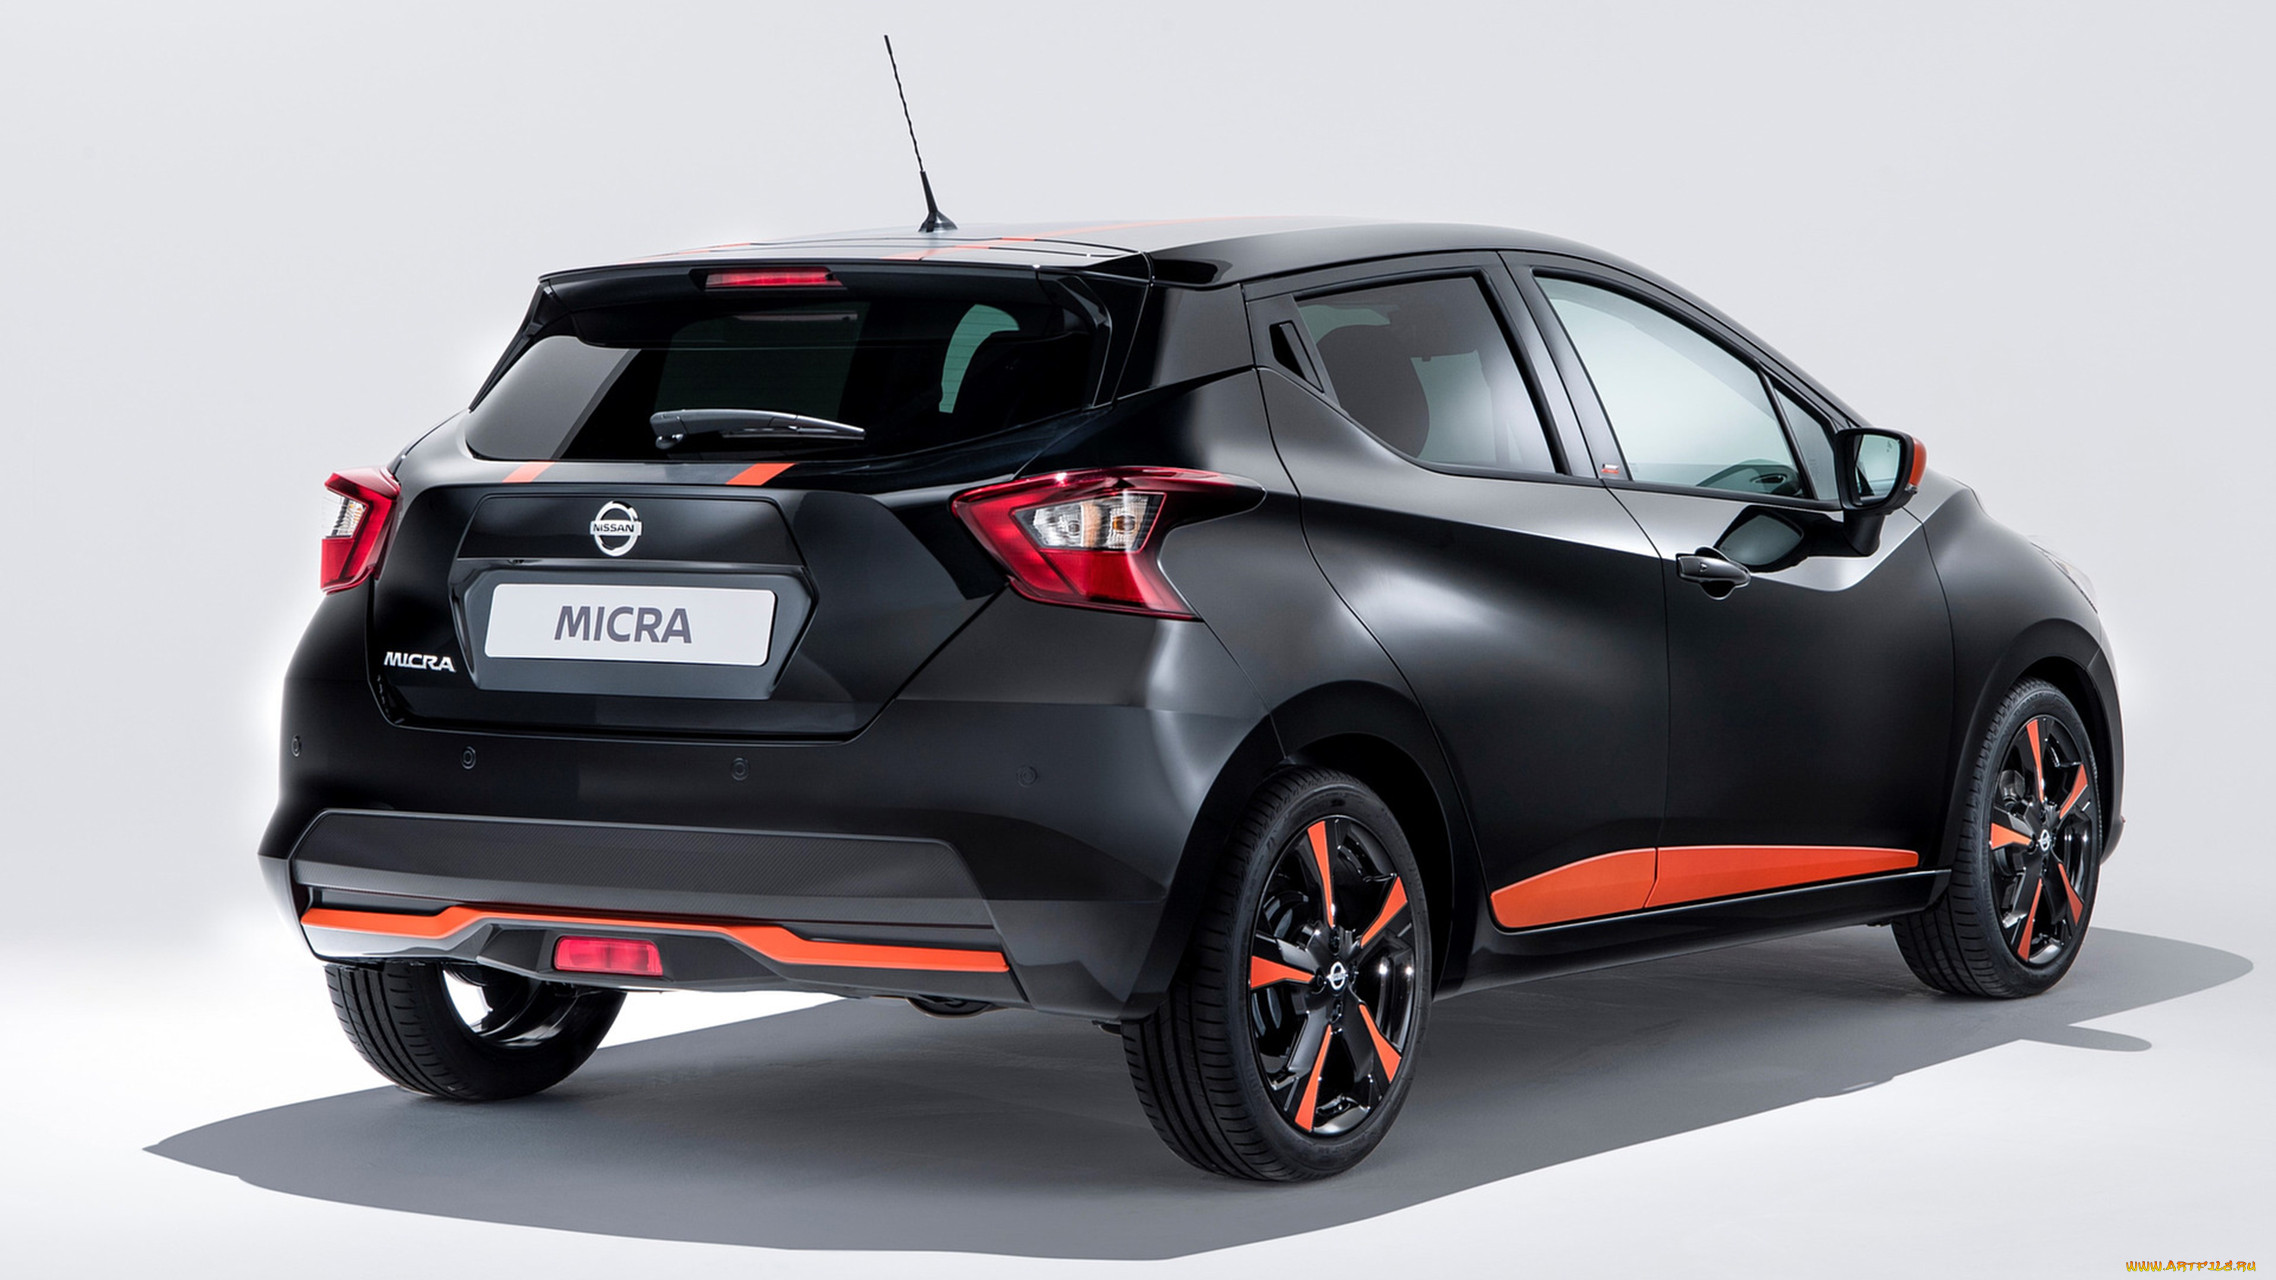 nissan micra bose personal edition 2017, , nissan, datsun, micra, 2017, edition, bose, personal